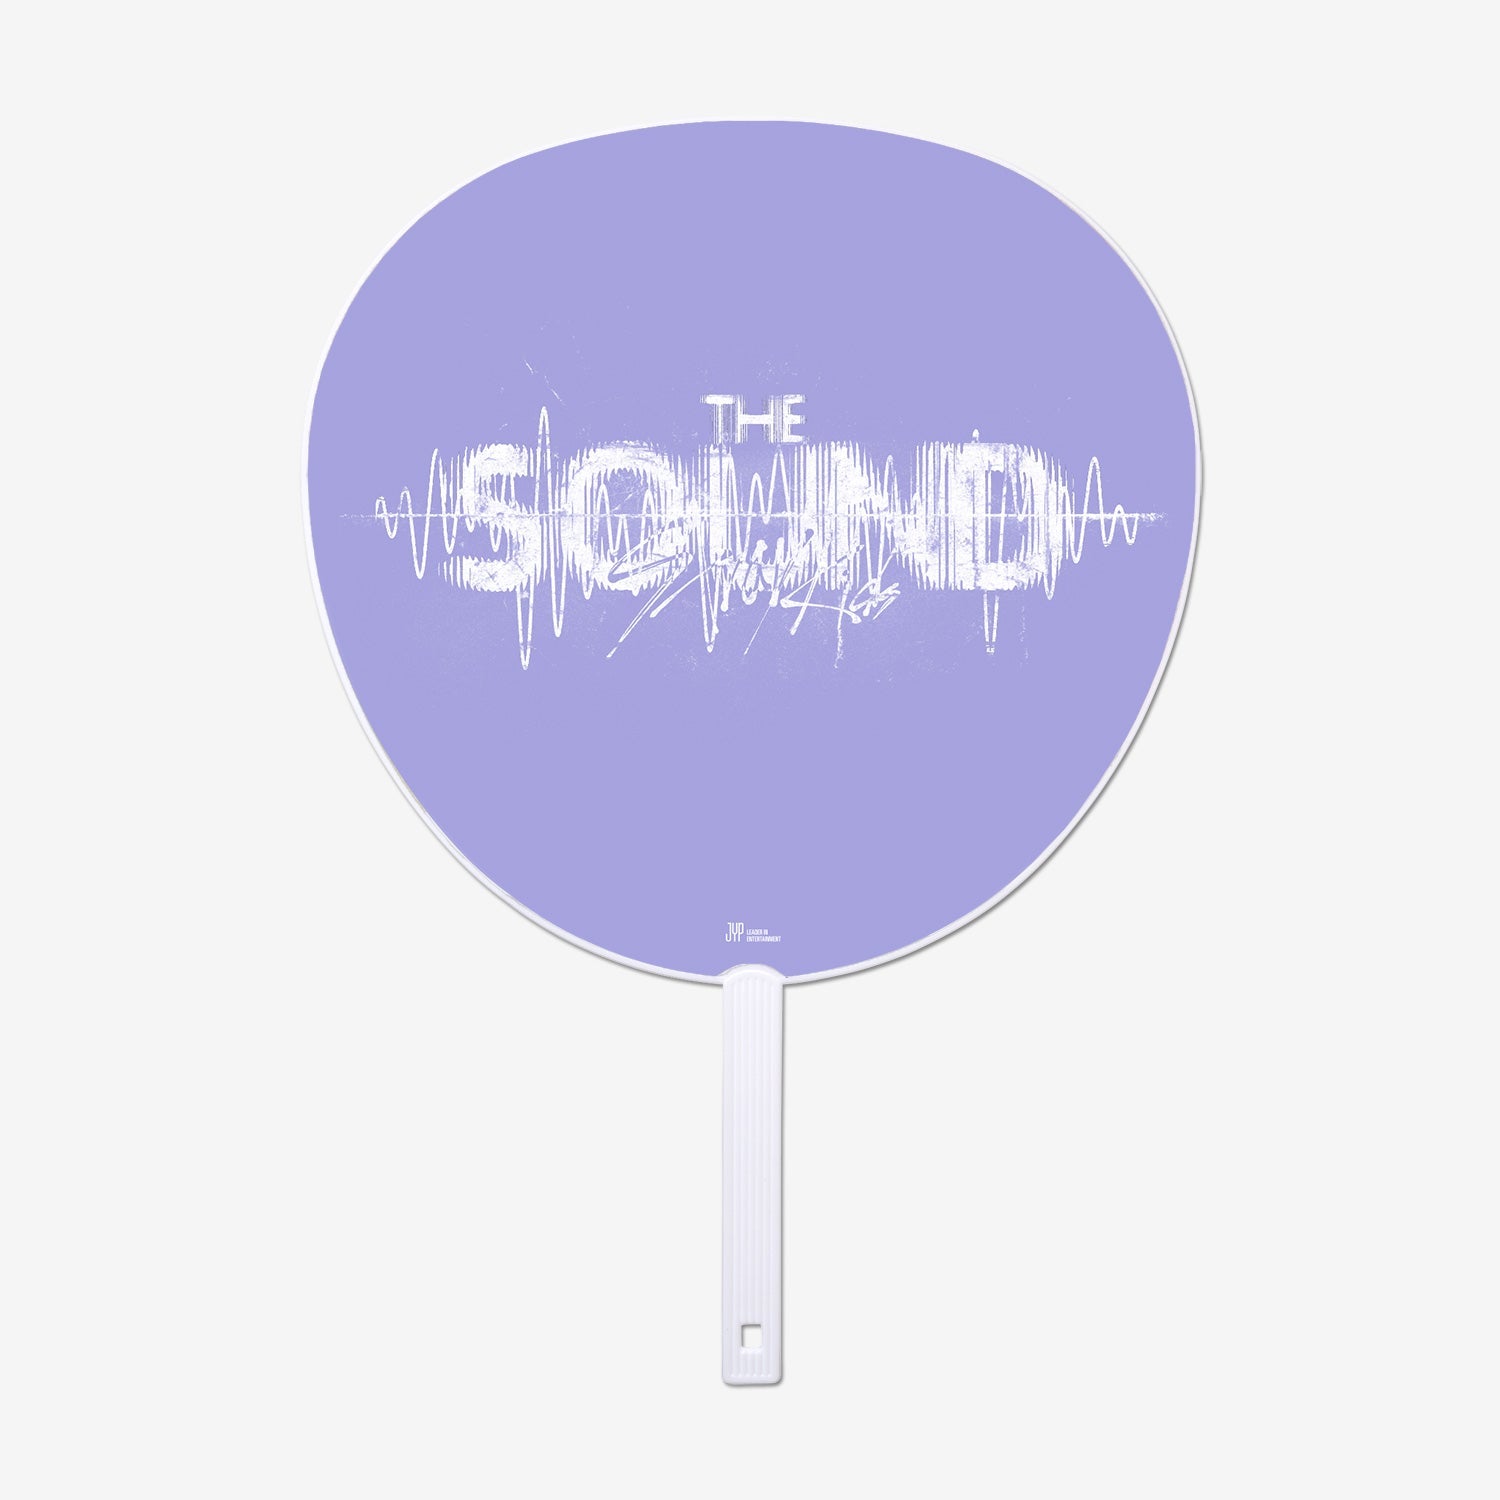 IMAGE PICKET - Seungmin / Stray Kids『THE SOUND』